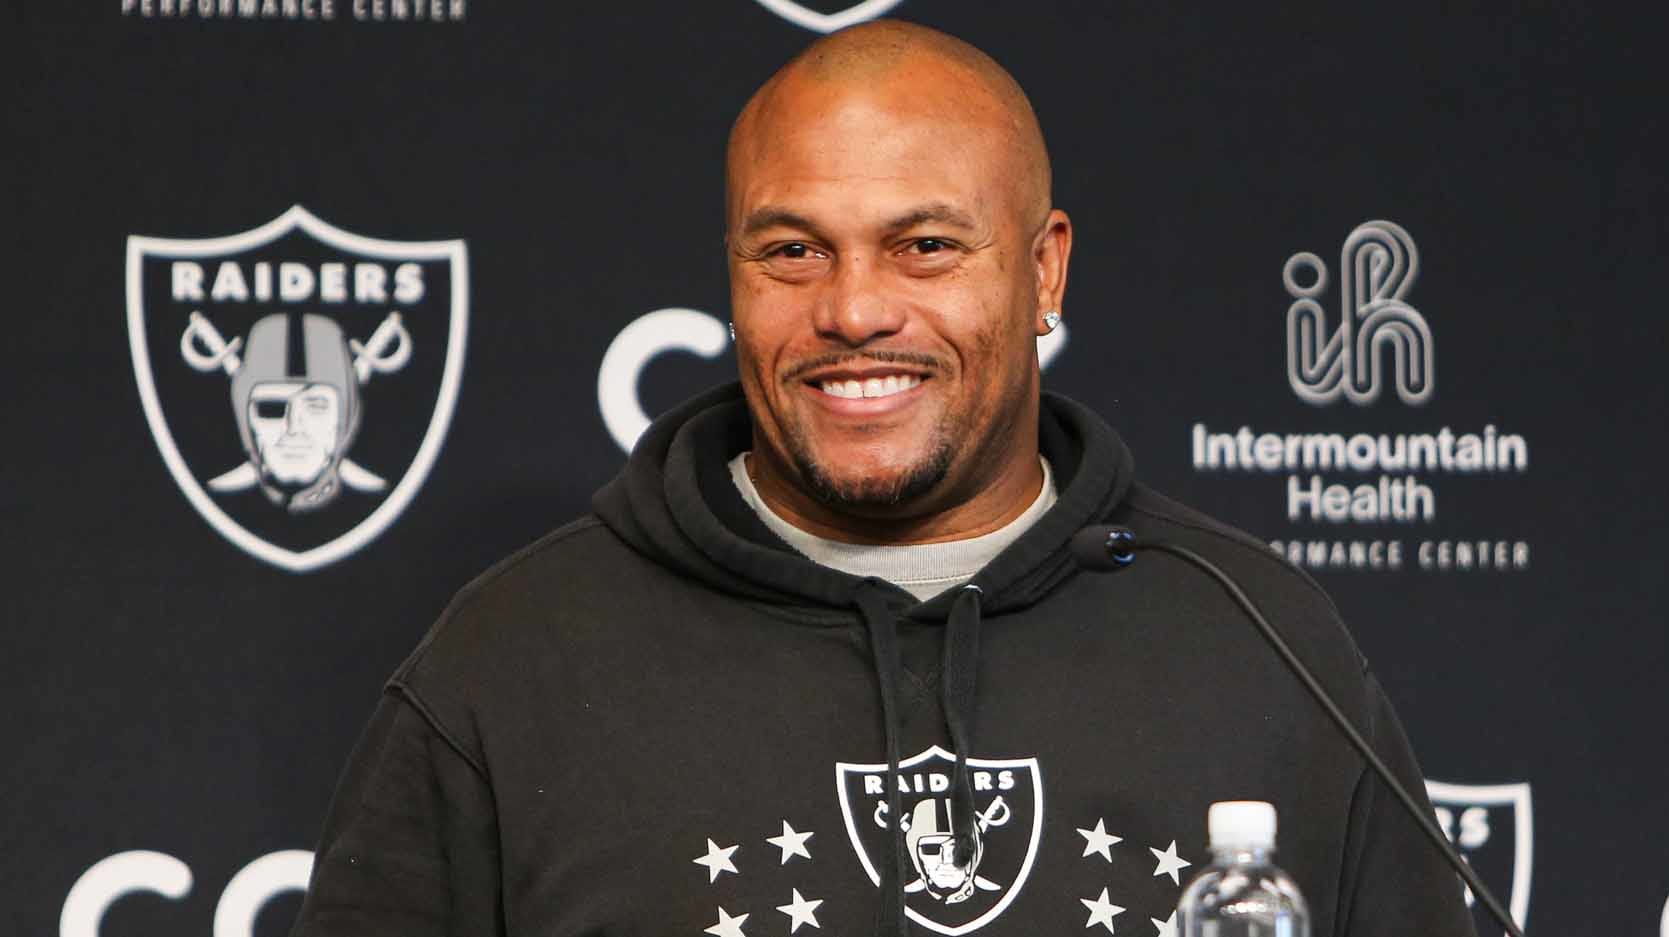 Antonio Pierce has been all smiles since taking over his dream job as the head coach of the Las Vegas Raiders.